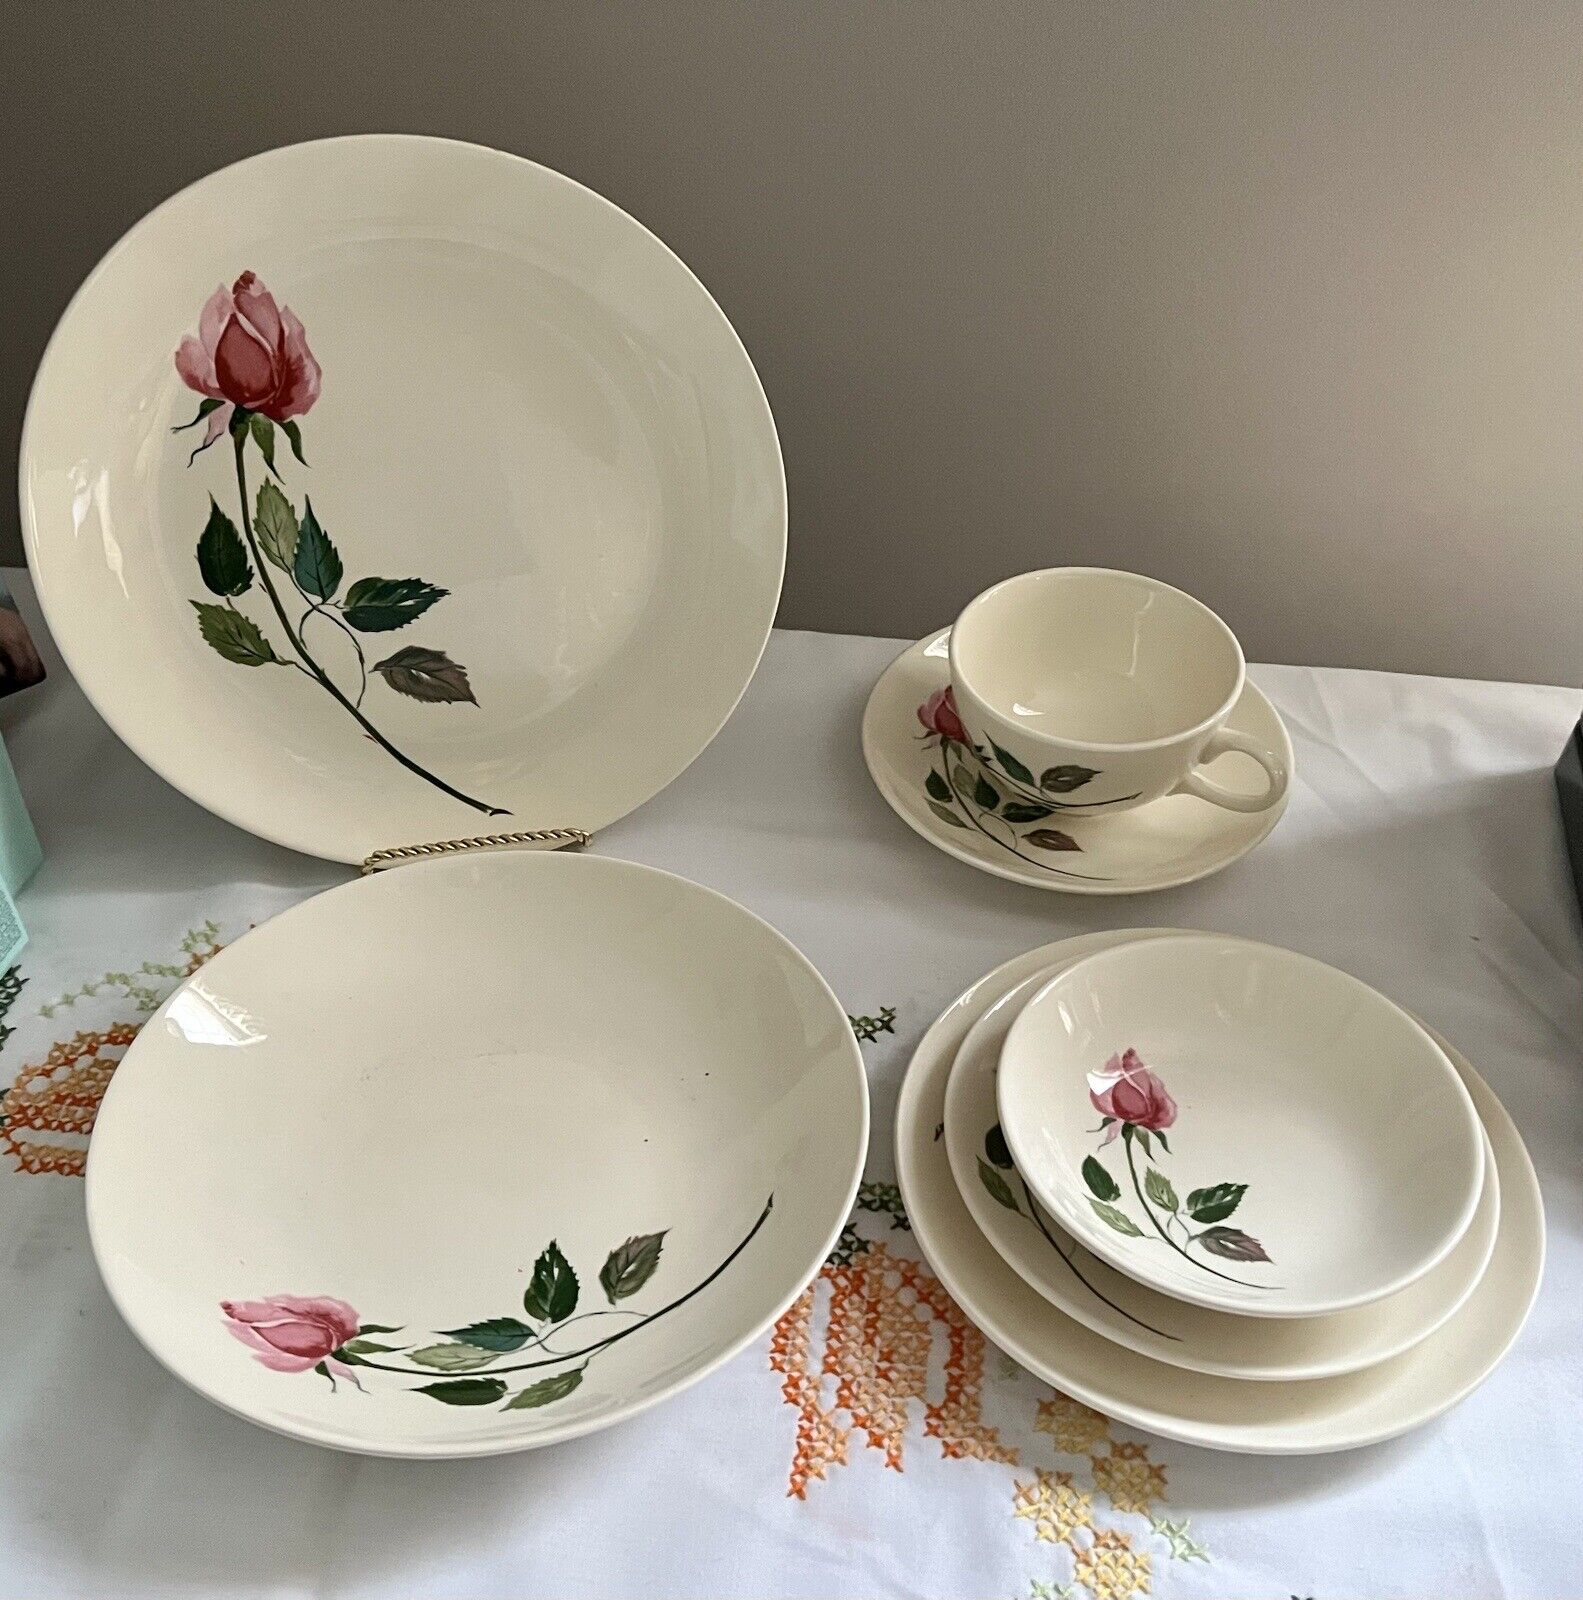 Cunningham & Pickett AMERICAN BEAUTY Pink Rose 7 Piece Place Setting For 4